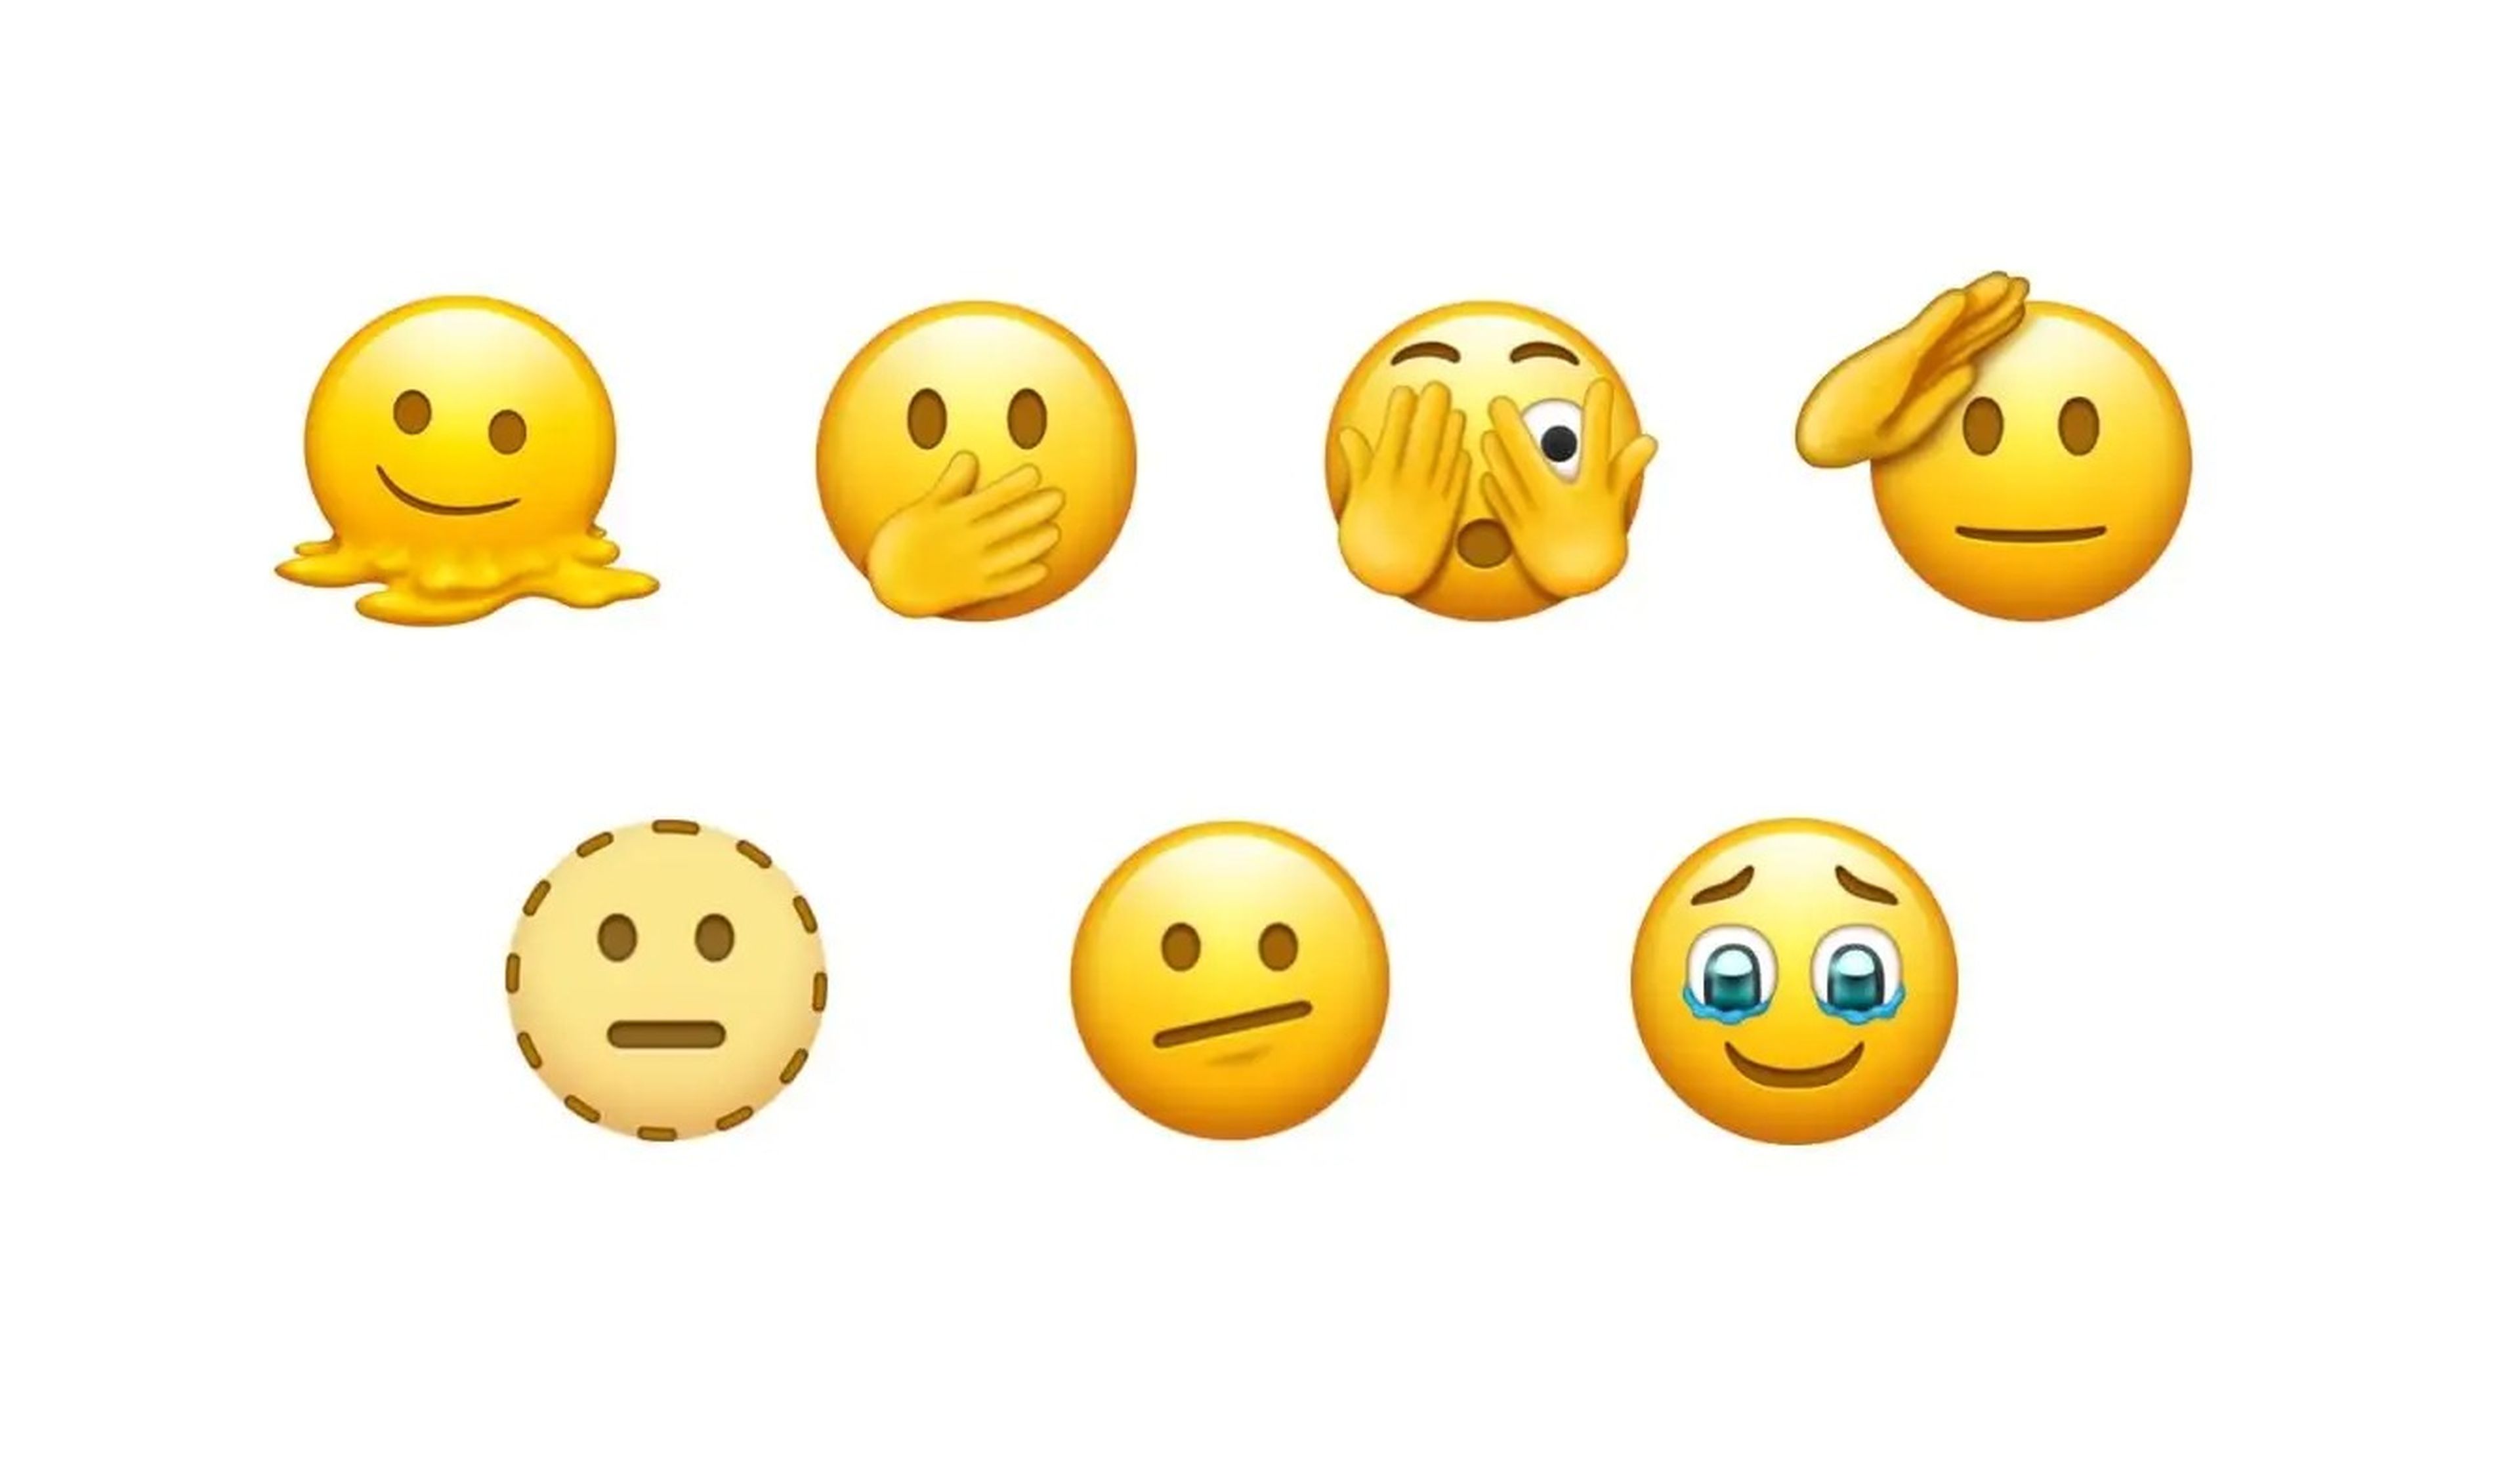 Above: Melting Face (top-left), Saluting Face (top-right) and Face Holding Back Tears (bottom-right) are among the emojis likely to be approved in September 2021. Image: Emojipedia Sample Image Collection